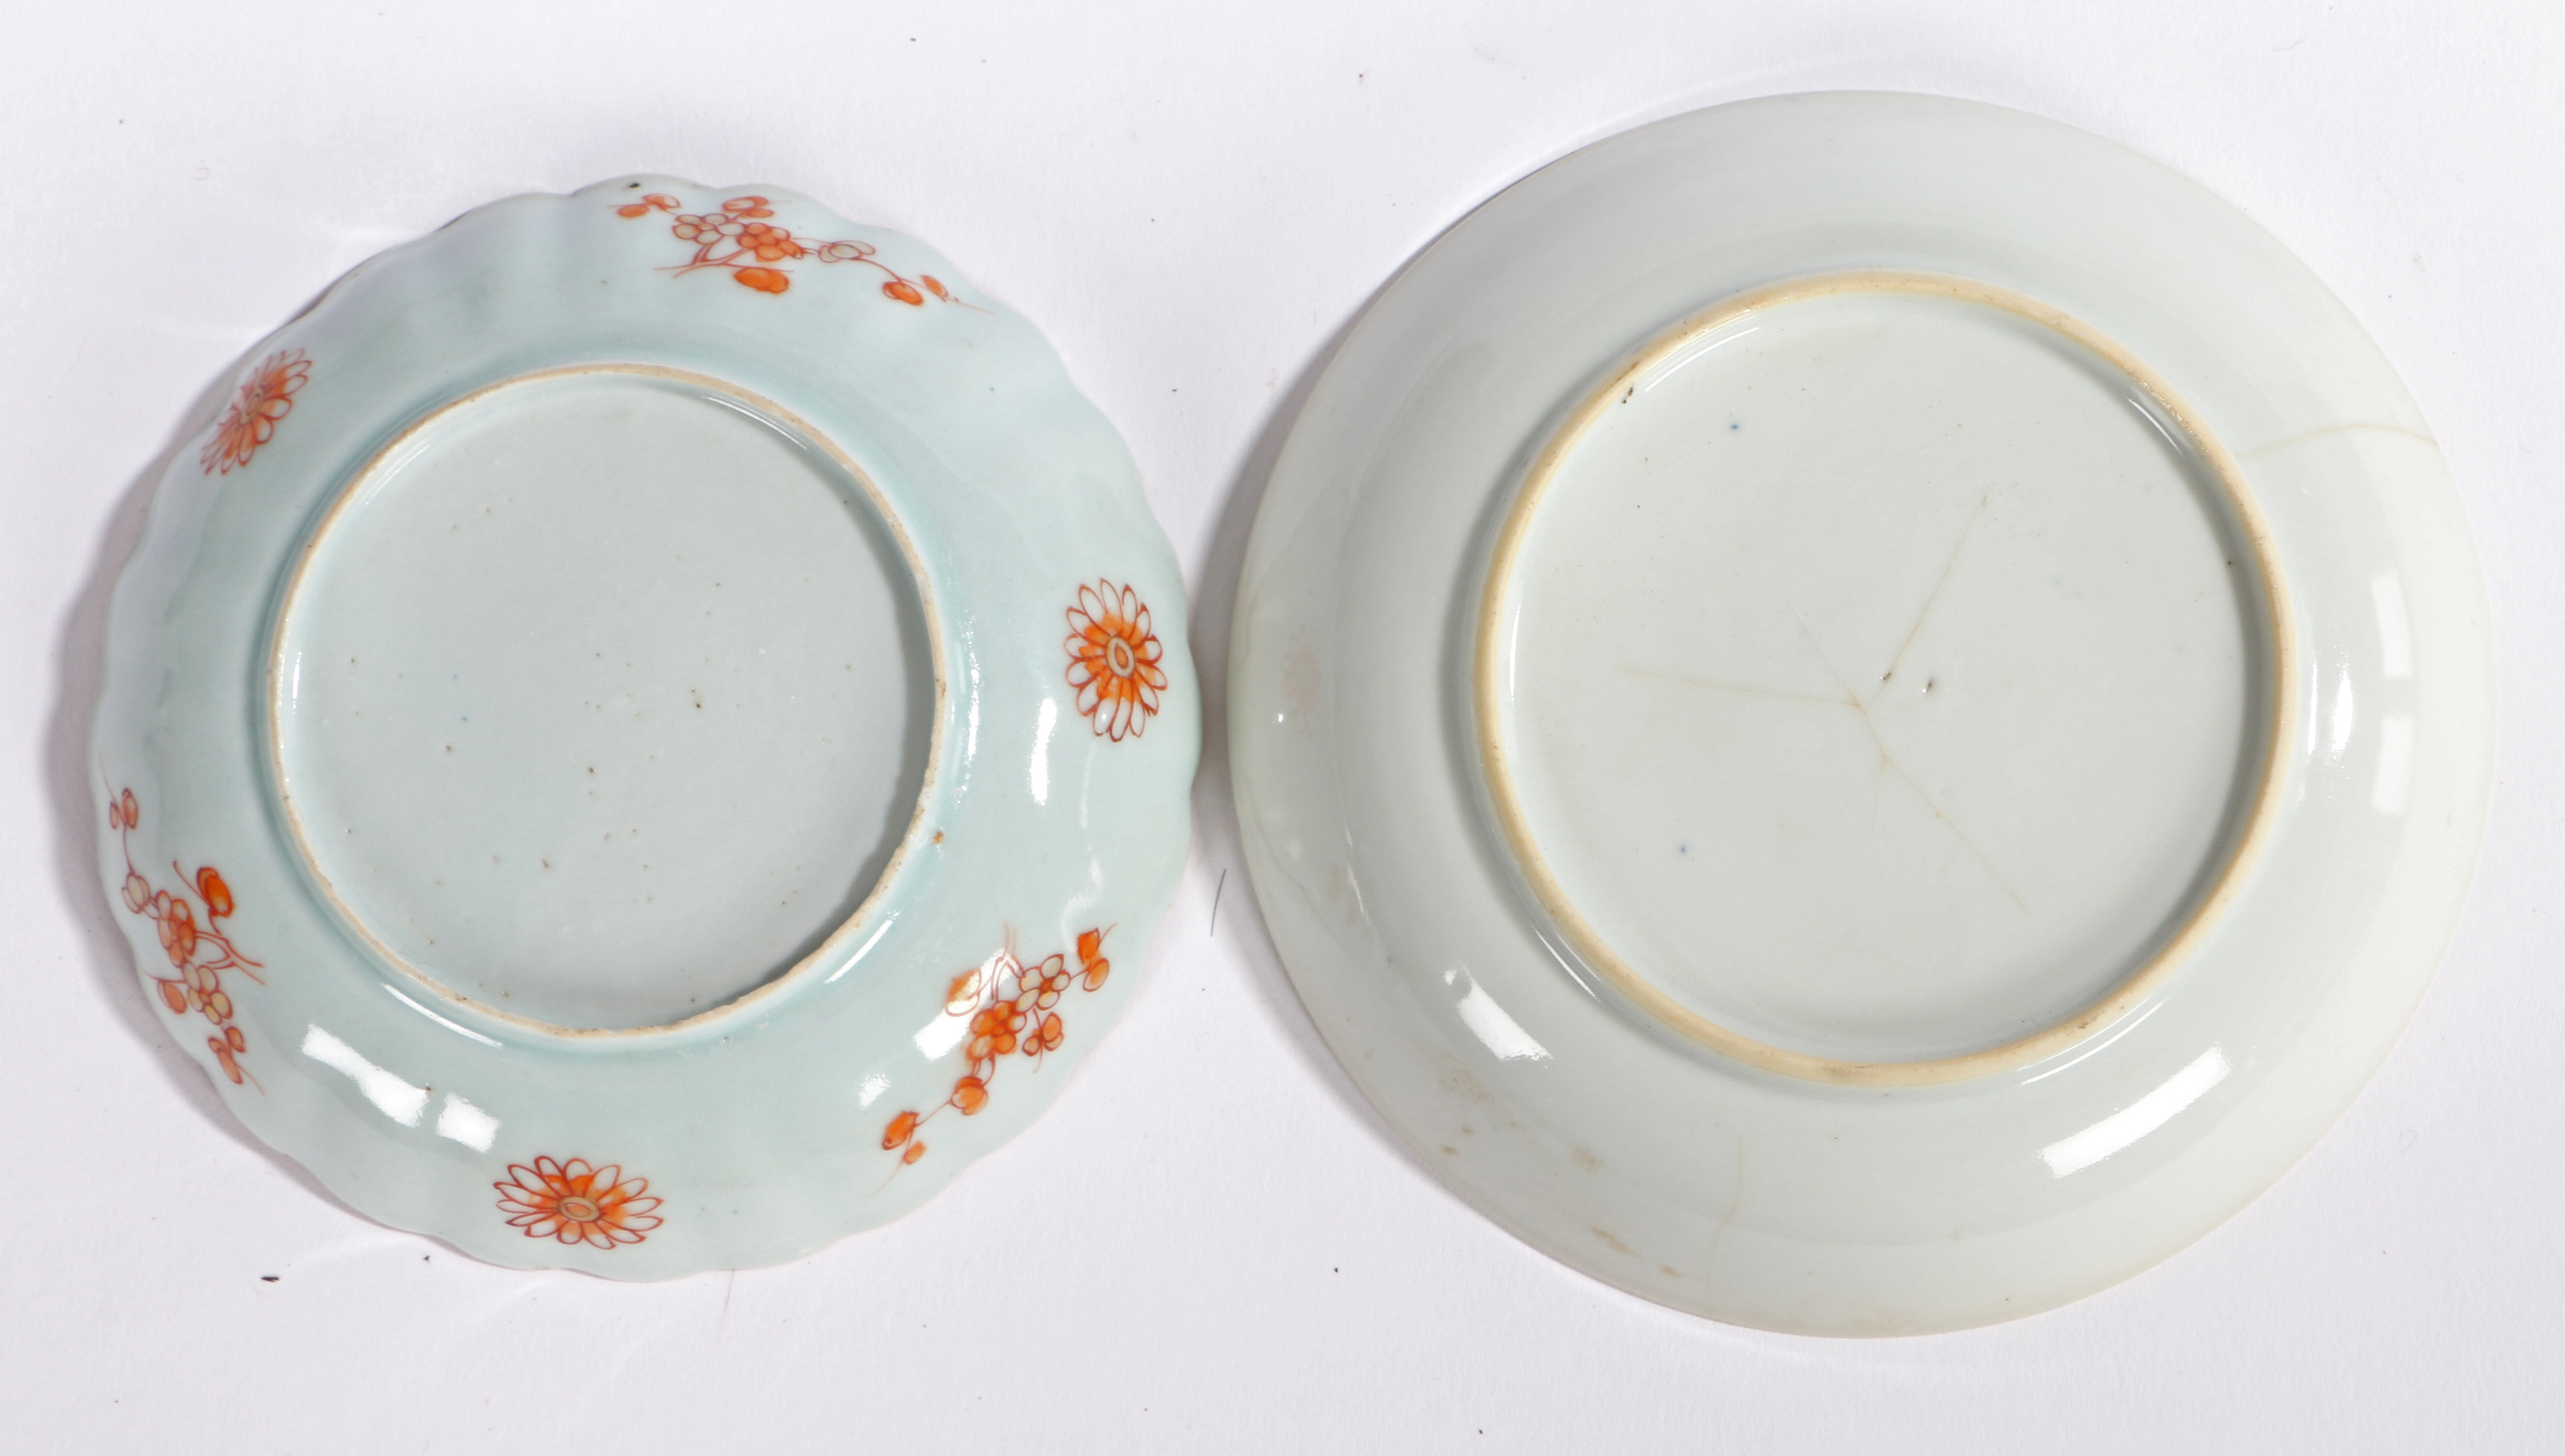 THREE CHINESE PORCELAIN PLATES, QING DYNASTY. - Image 3 of 3